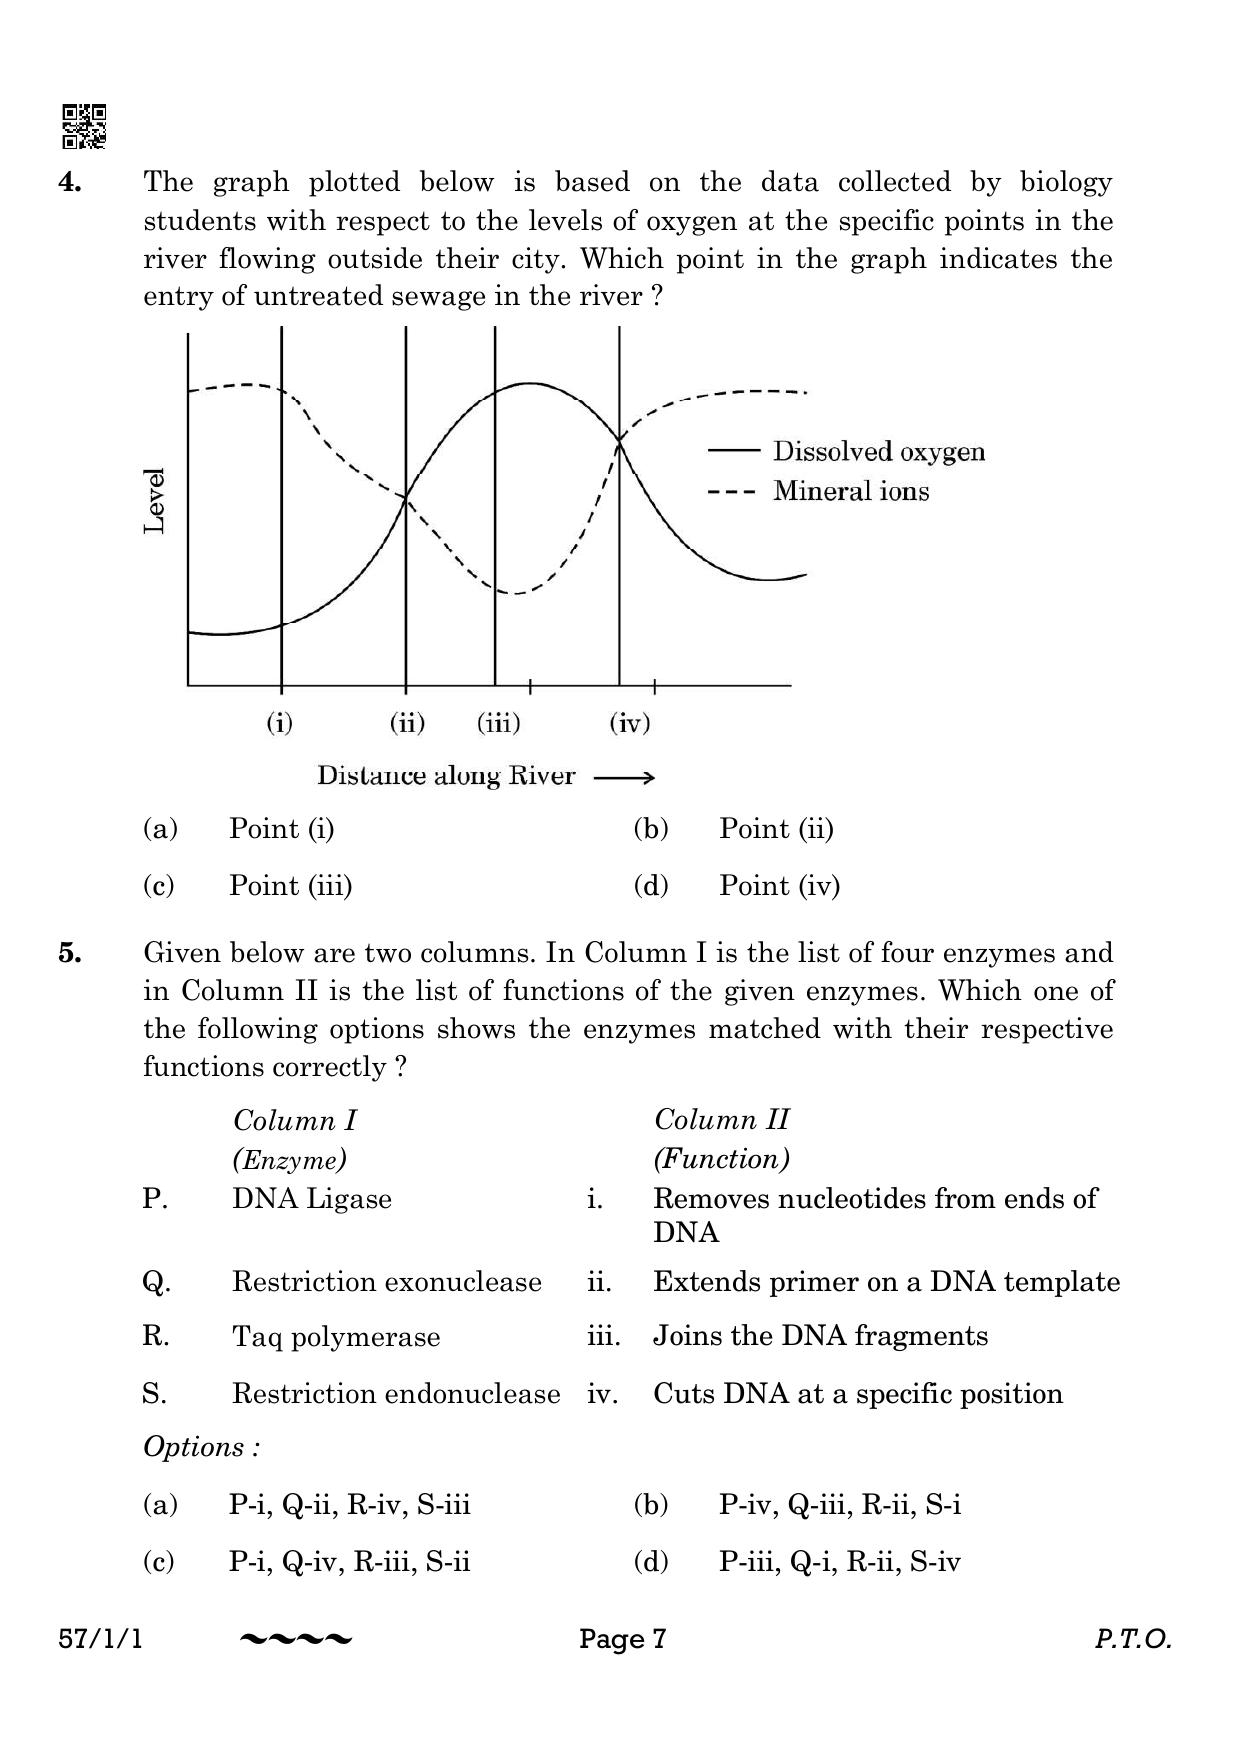 CBSE Class 12 57-1-1 Biology 2023 Question Paper - Page 7